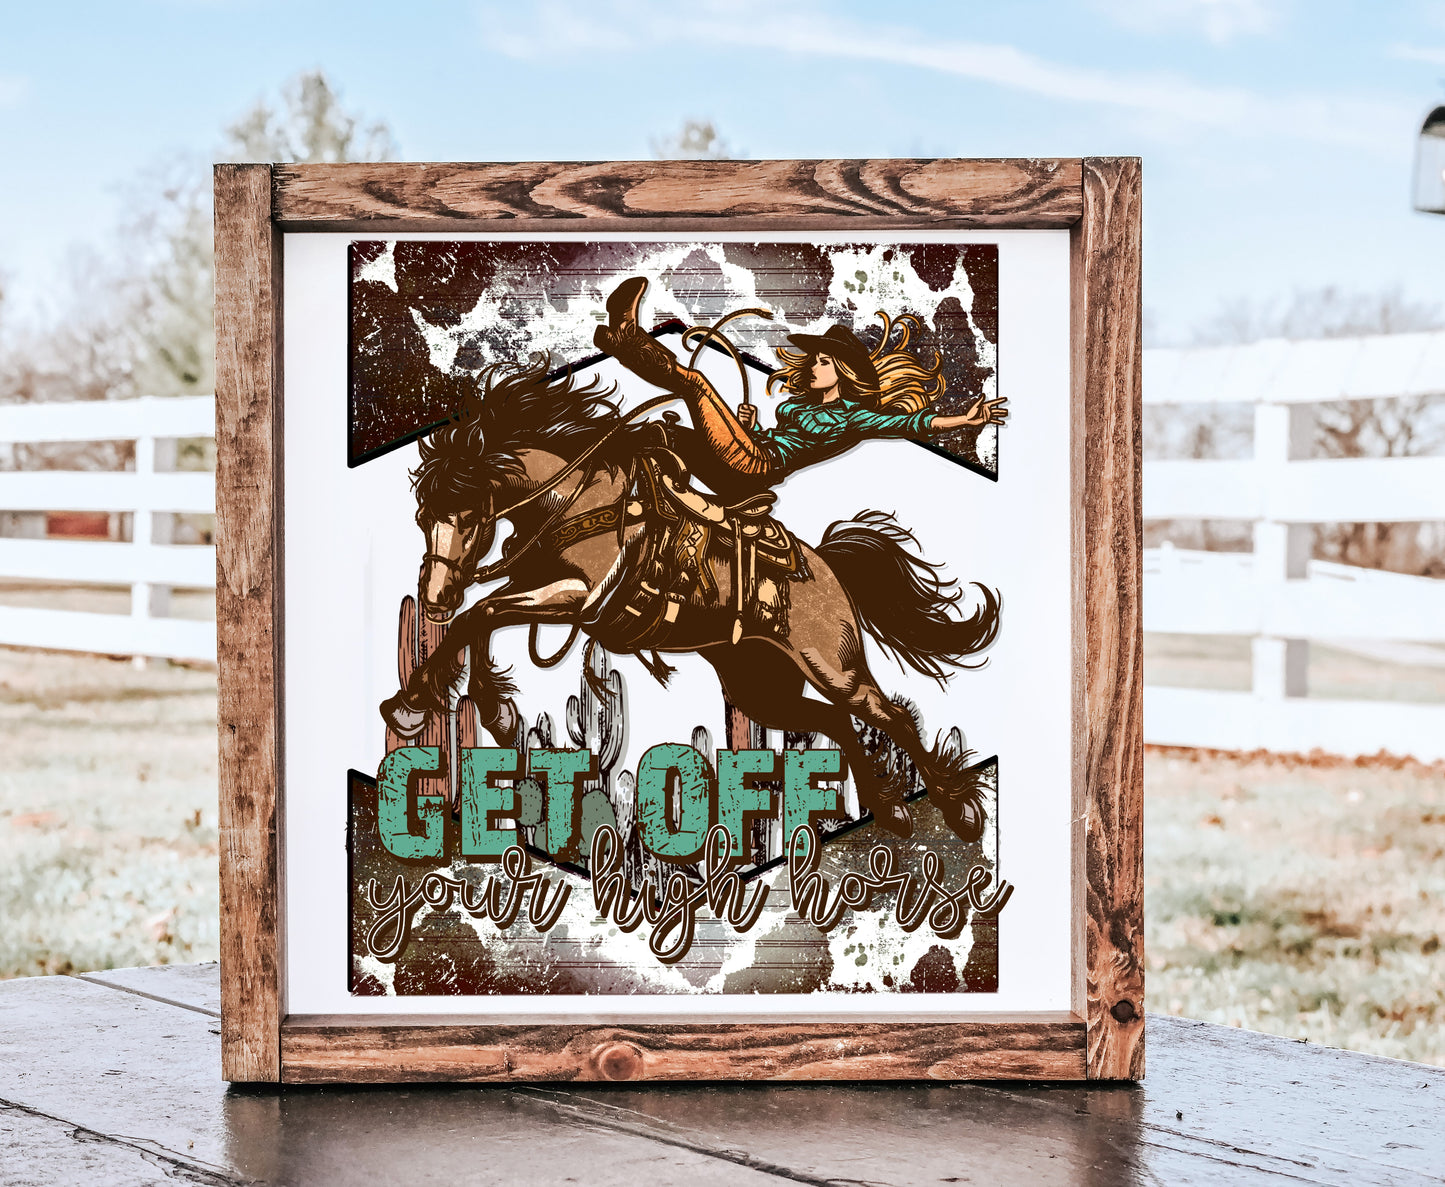 Framed Wooden Rustic Horse Wall Decor - 13" or 7" Sizes Available